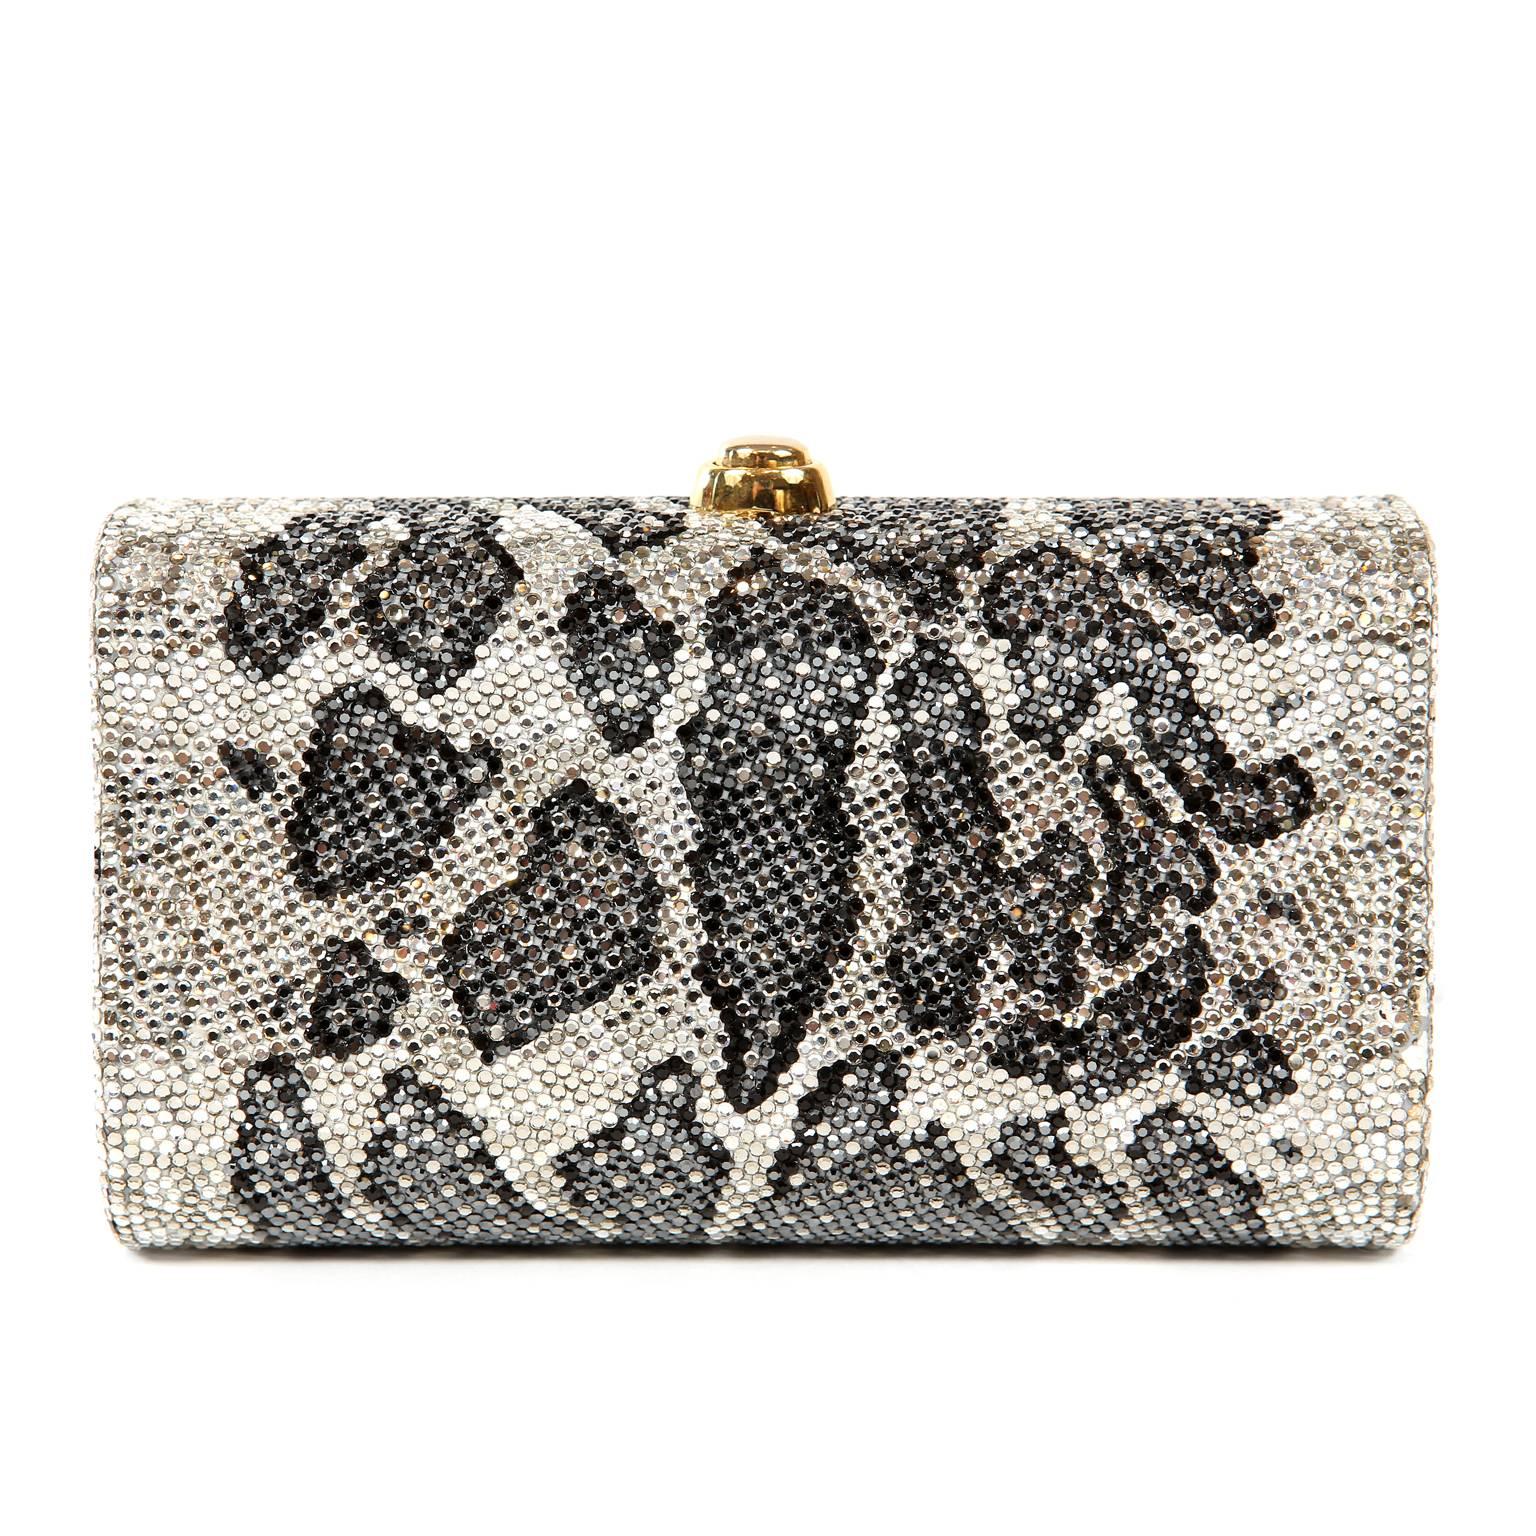 Judith Leiber Leopard Crystal Minaudiere Evening Bag- Pristine
Carried by celebrities and other fashion elites, Judith Leiber’s crystal minaudieres are legendary.  
Structured small clutch is covered in white, black and grey crystals creating a